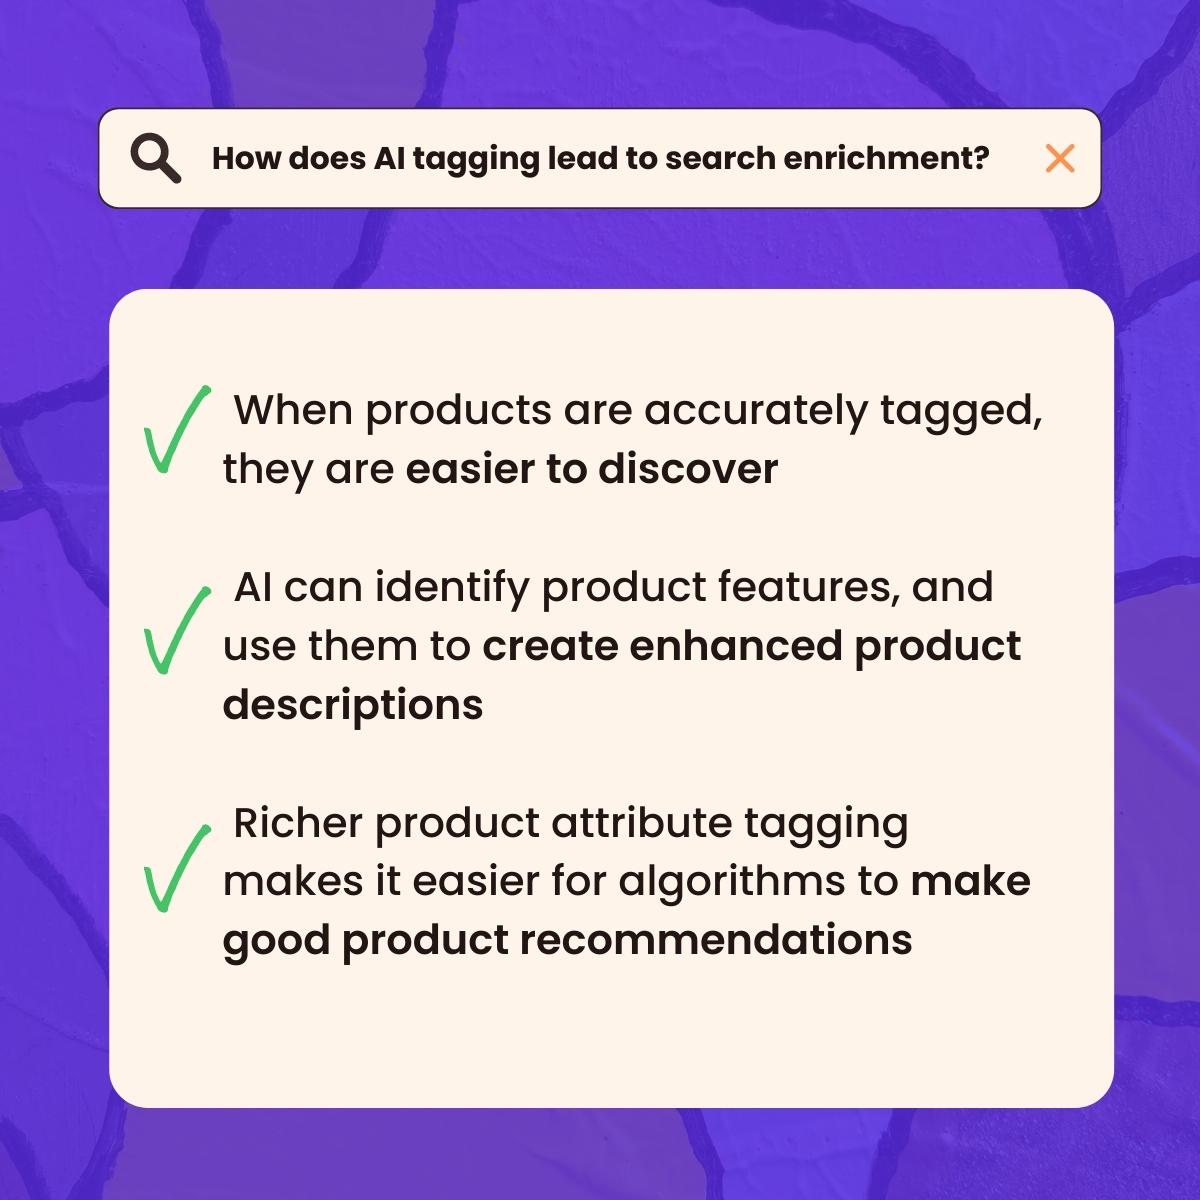 A list of the benefits of AI tagging for eCommerce search enrichment